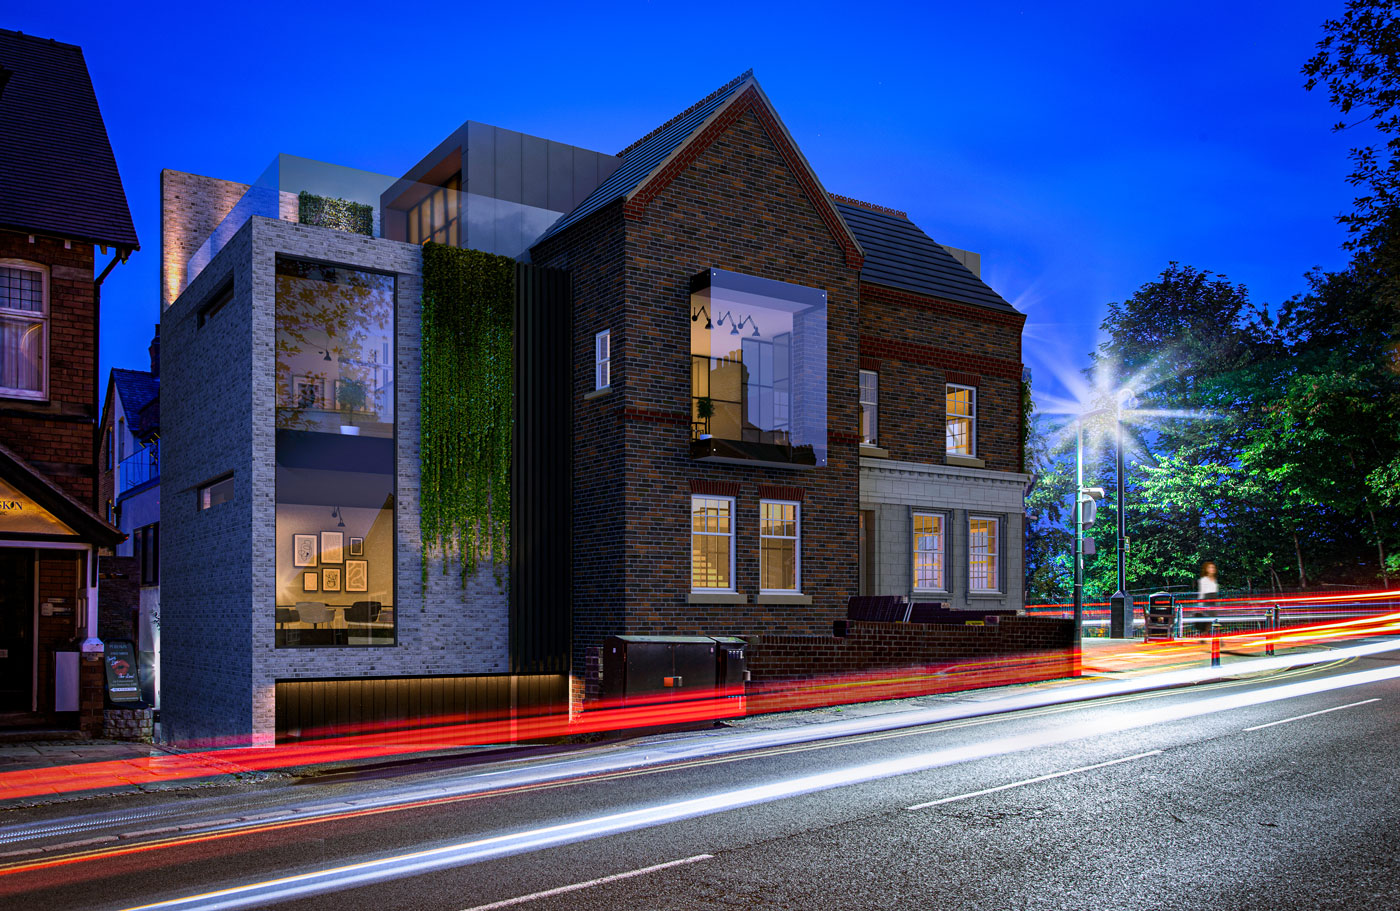 Existing/Proposed – Heyes Lane, Evening view